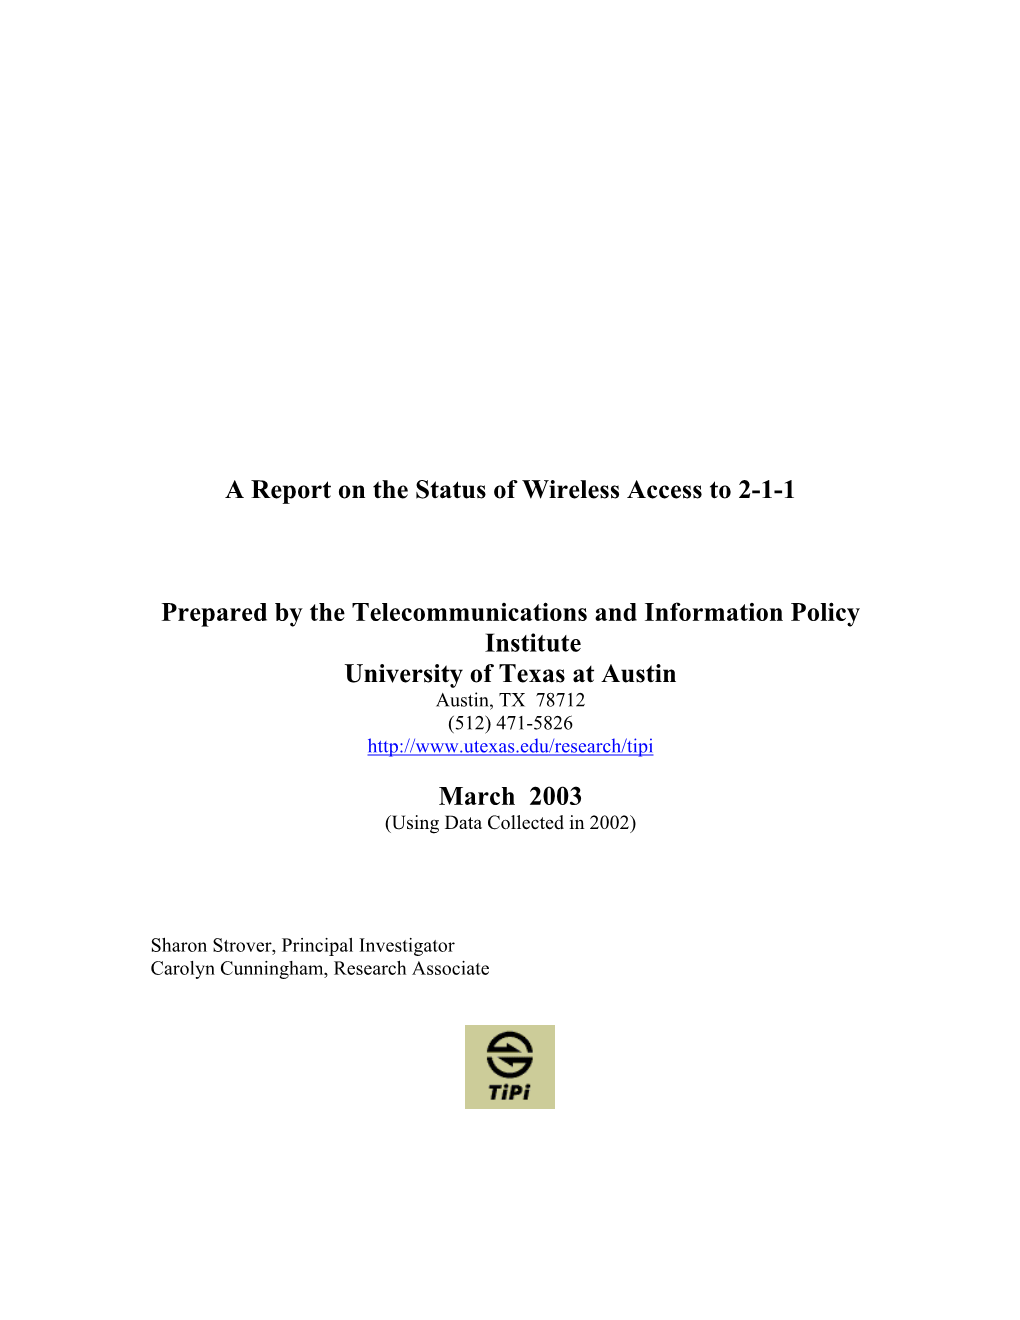 A Report on the Status of Wireless Access to 2-1-1